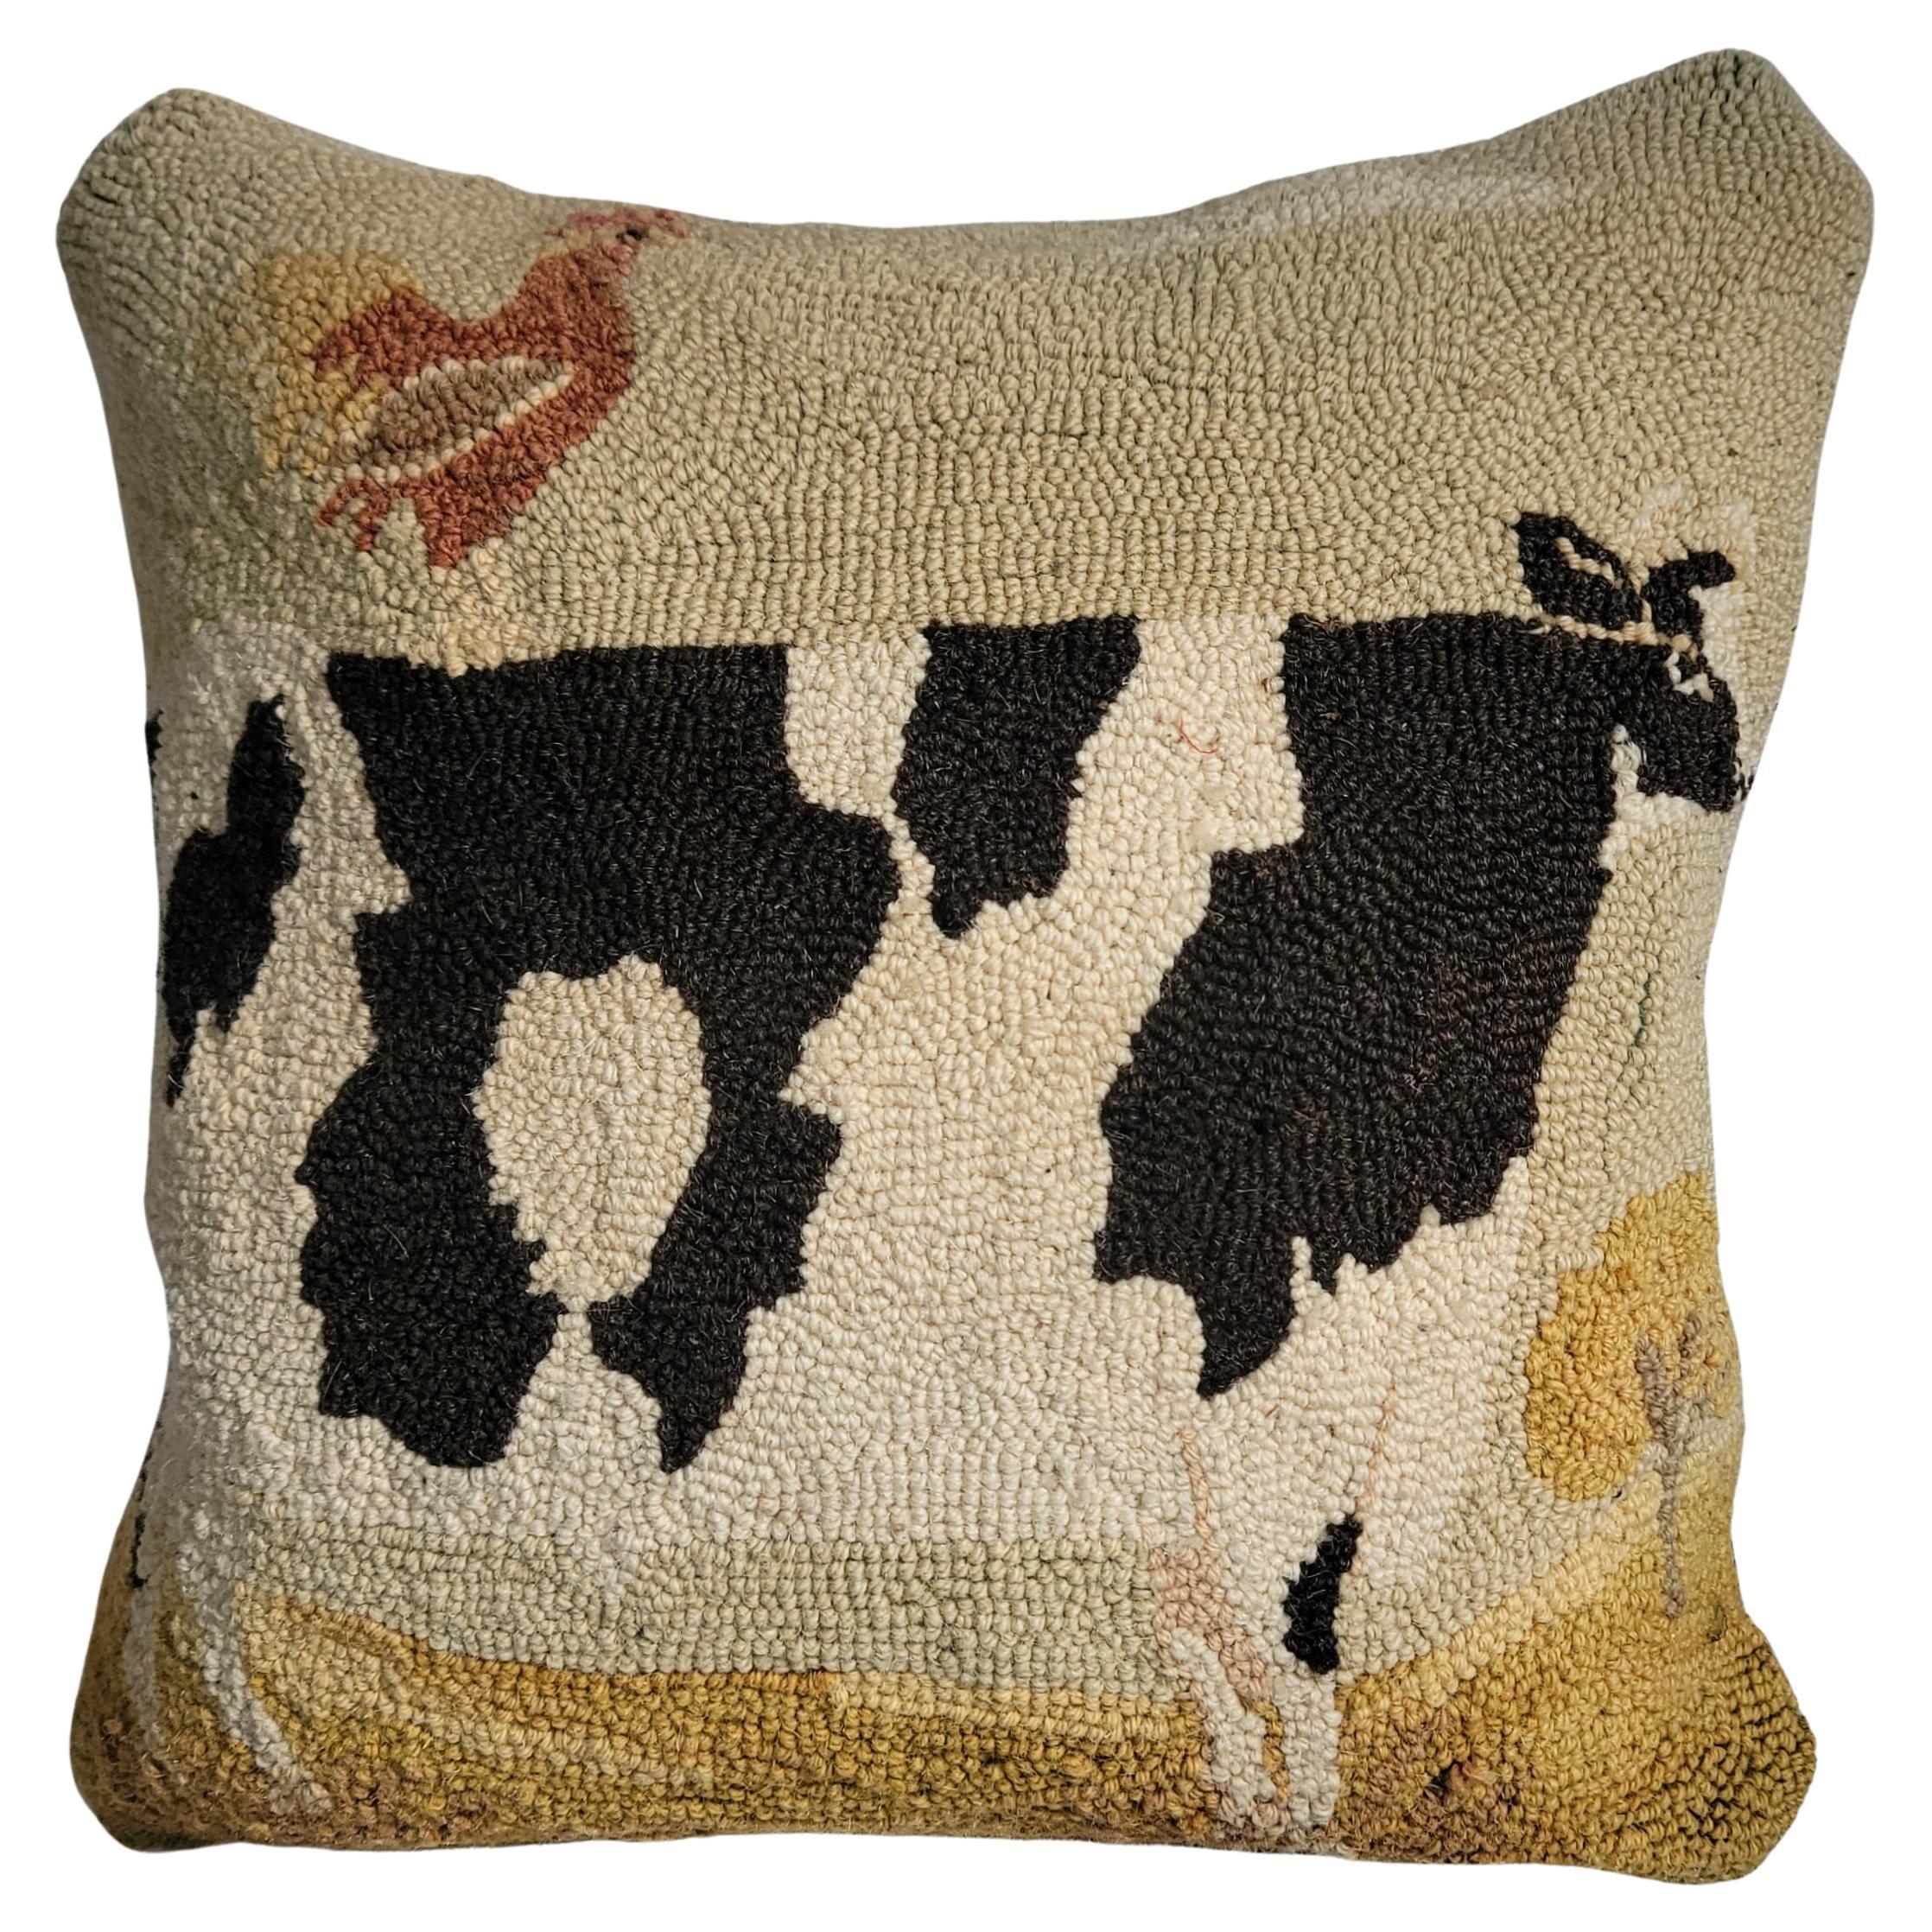 Hand Hooked Cow Rug Pillow w/ Leather Backing For Sale